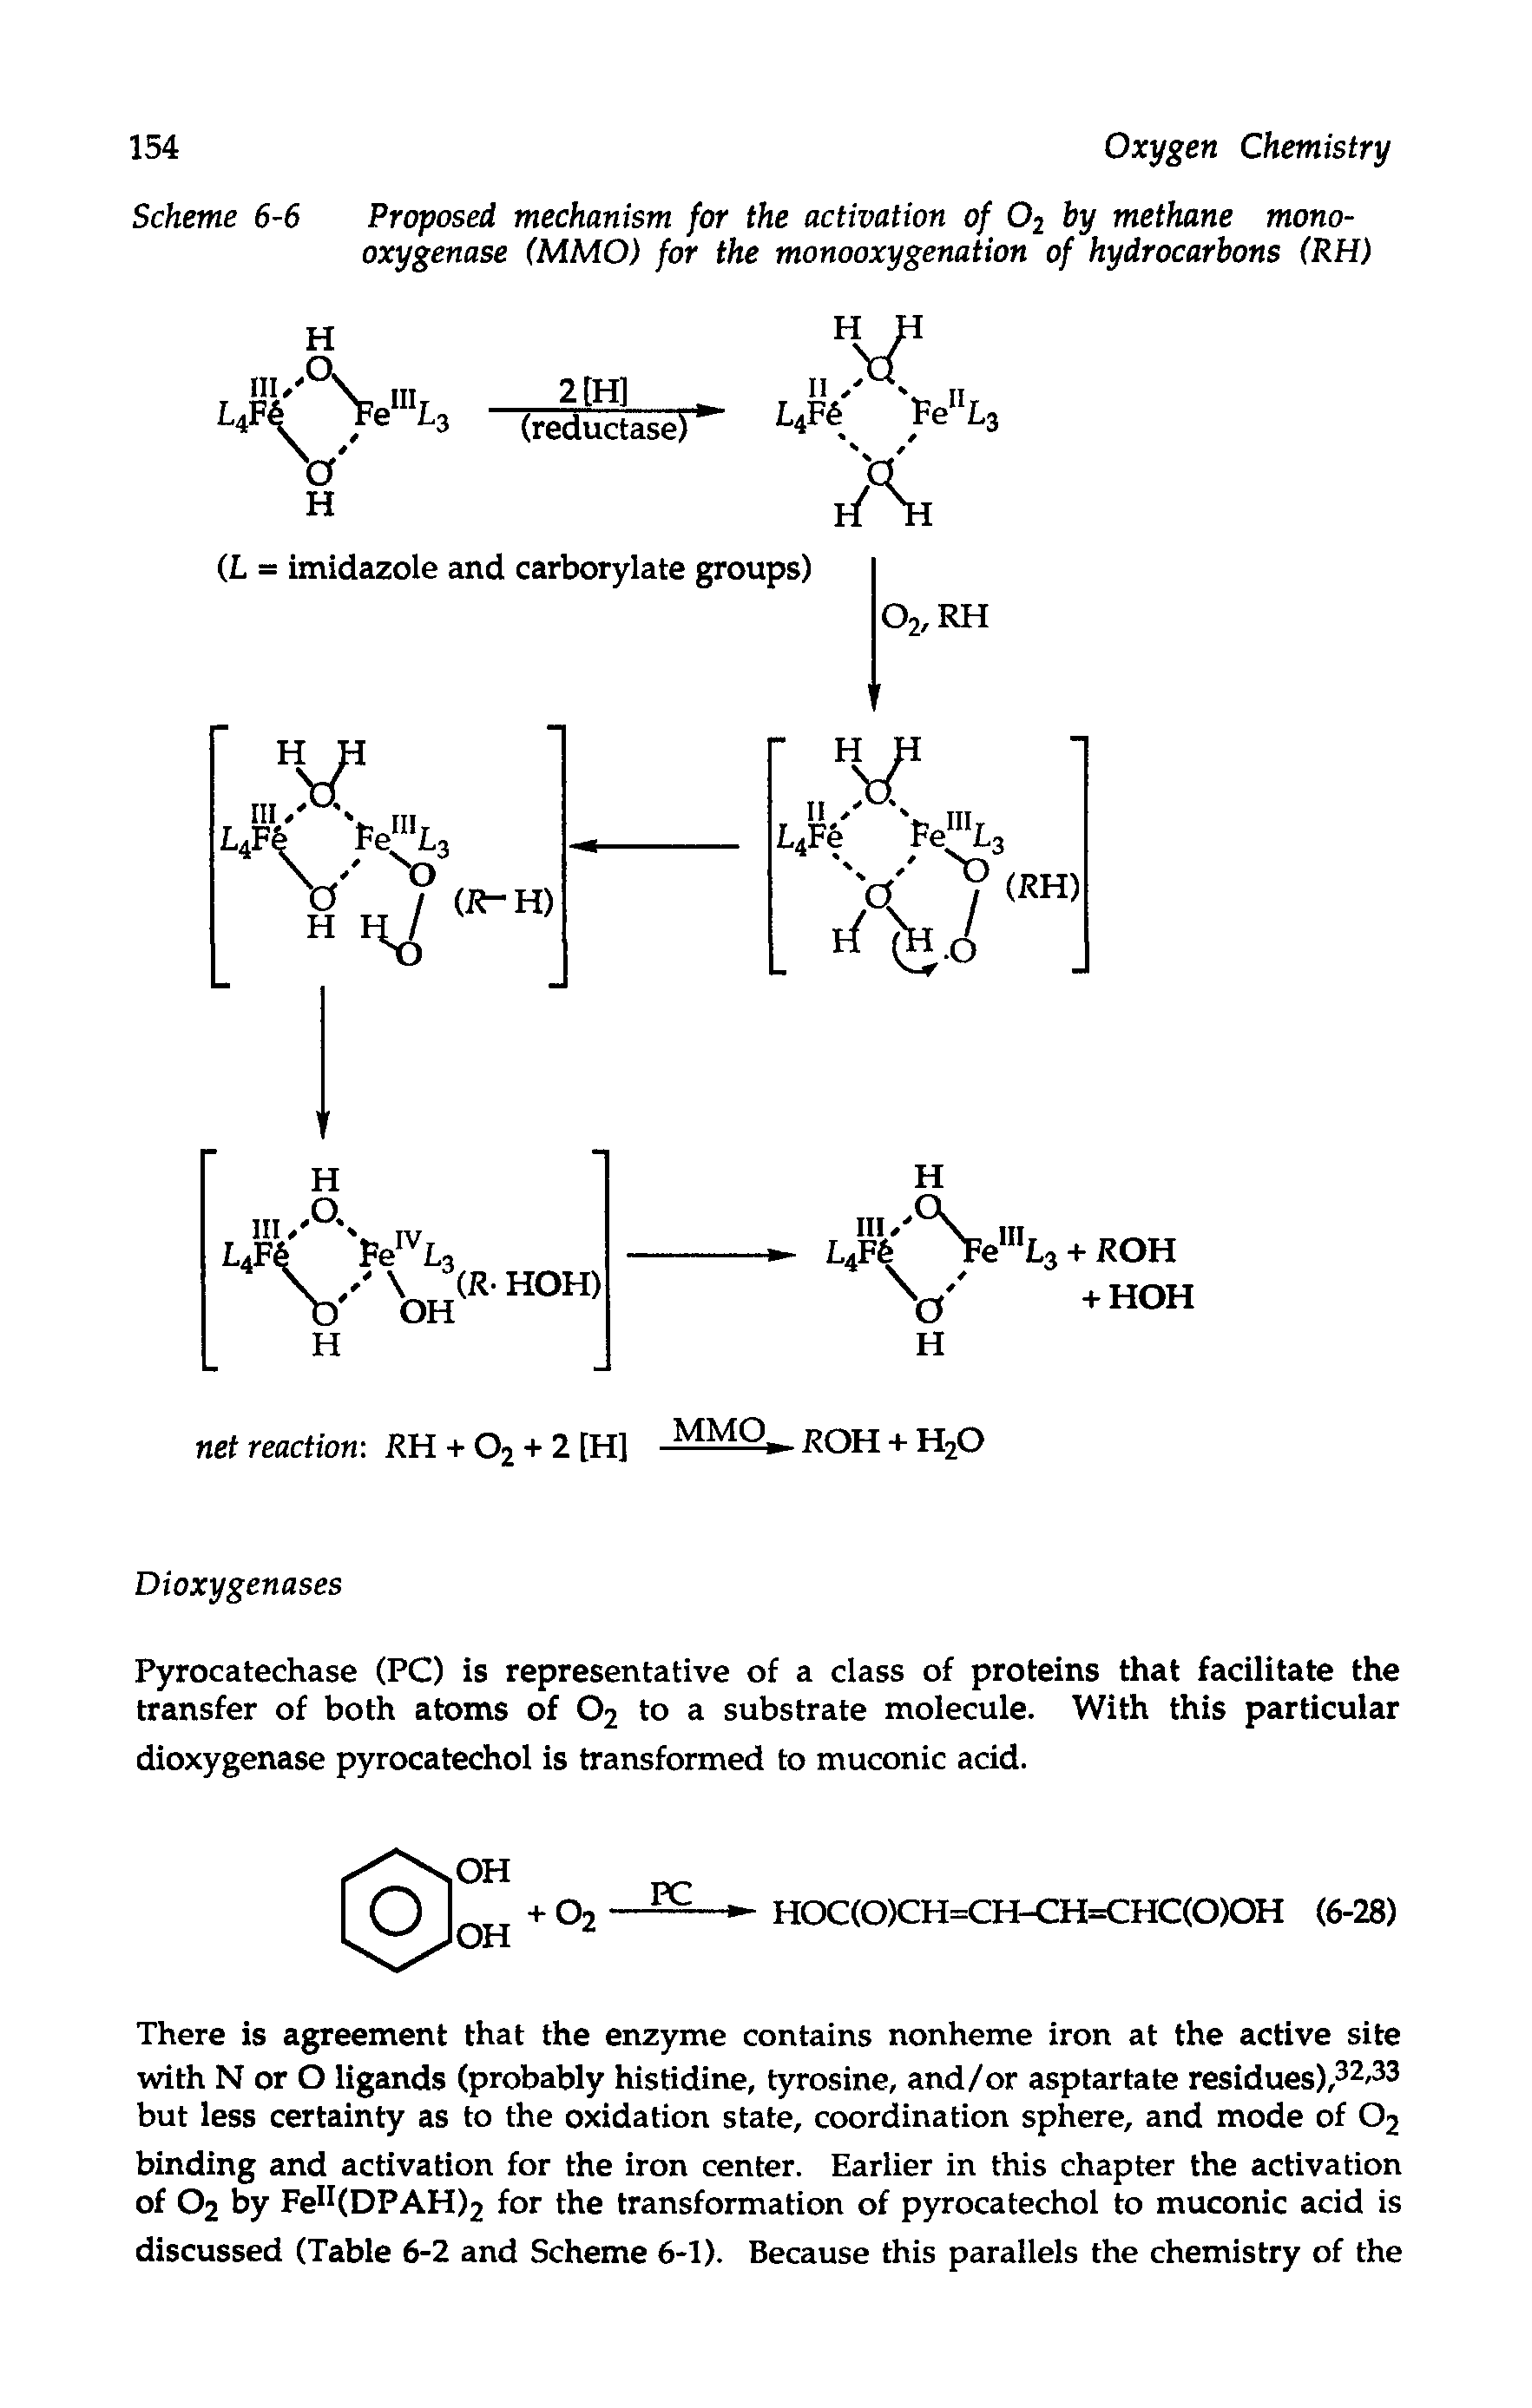 Scheme 6-6 Proposed mechanism for the activation of O2 by methane monooxygenase (M.MO) for the monooxygenation of hydrocarbons (RH)...